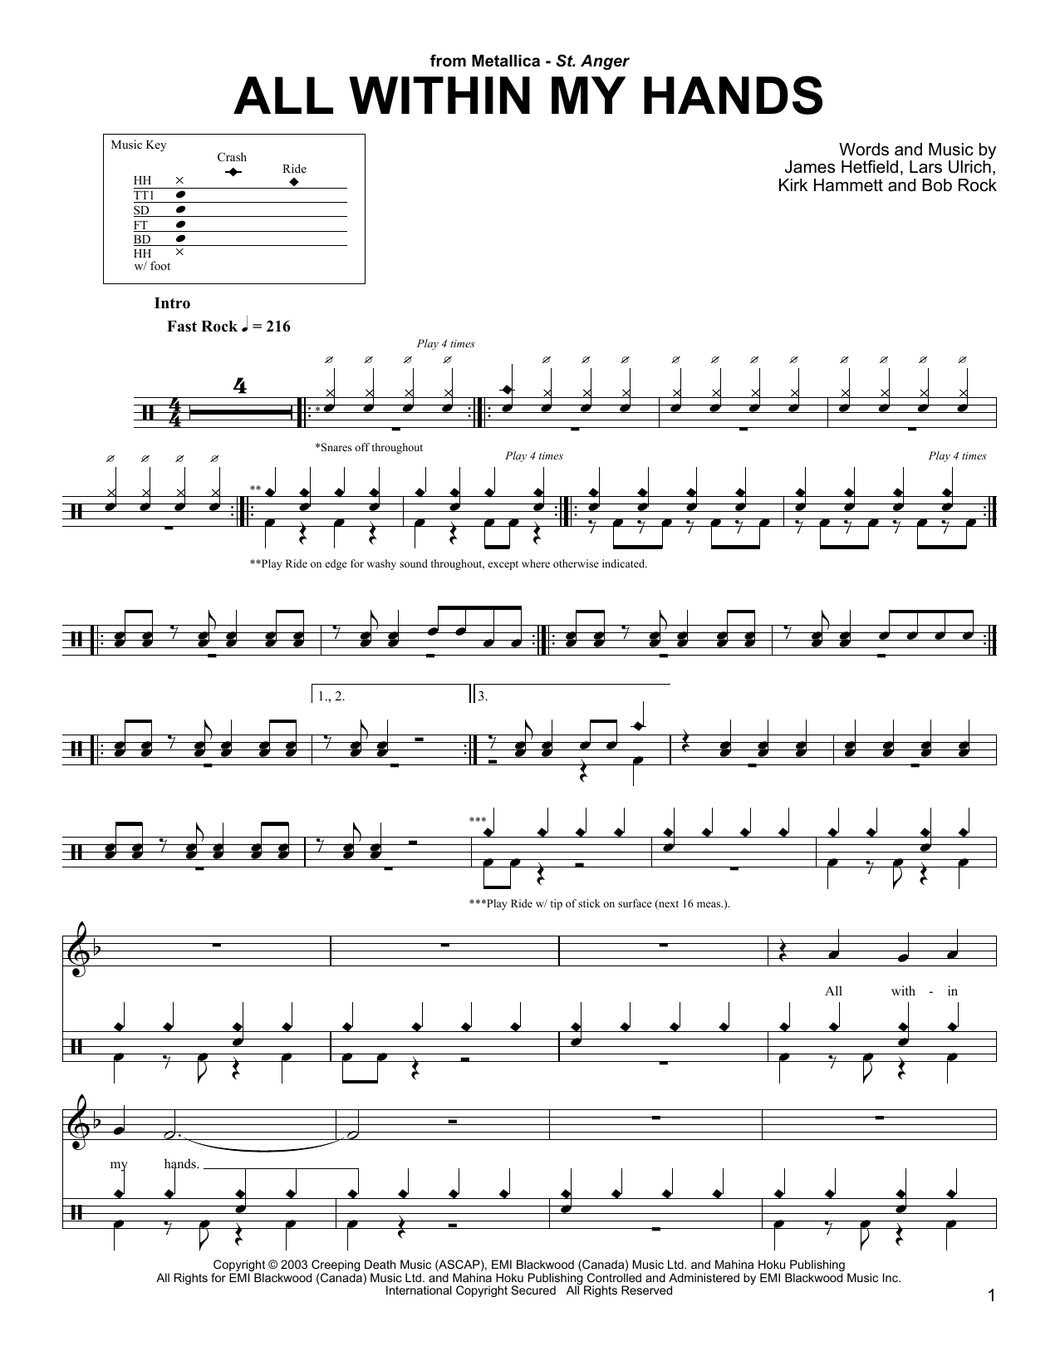 All Within My Hands - Metallica - Full Drum Transcription / Drum Sheet Music - SheetMusicDirect DT